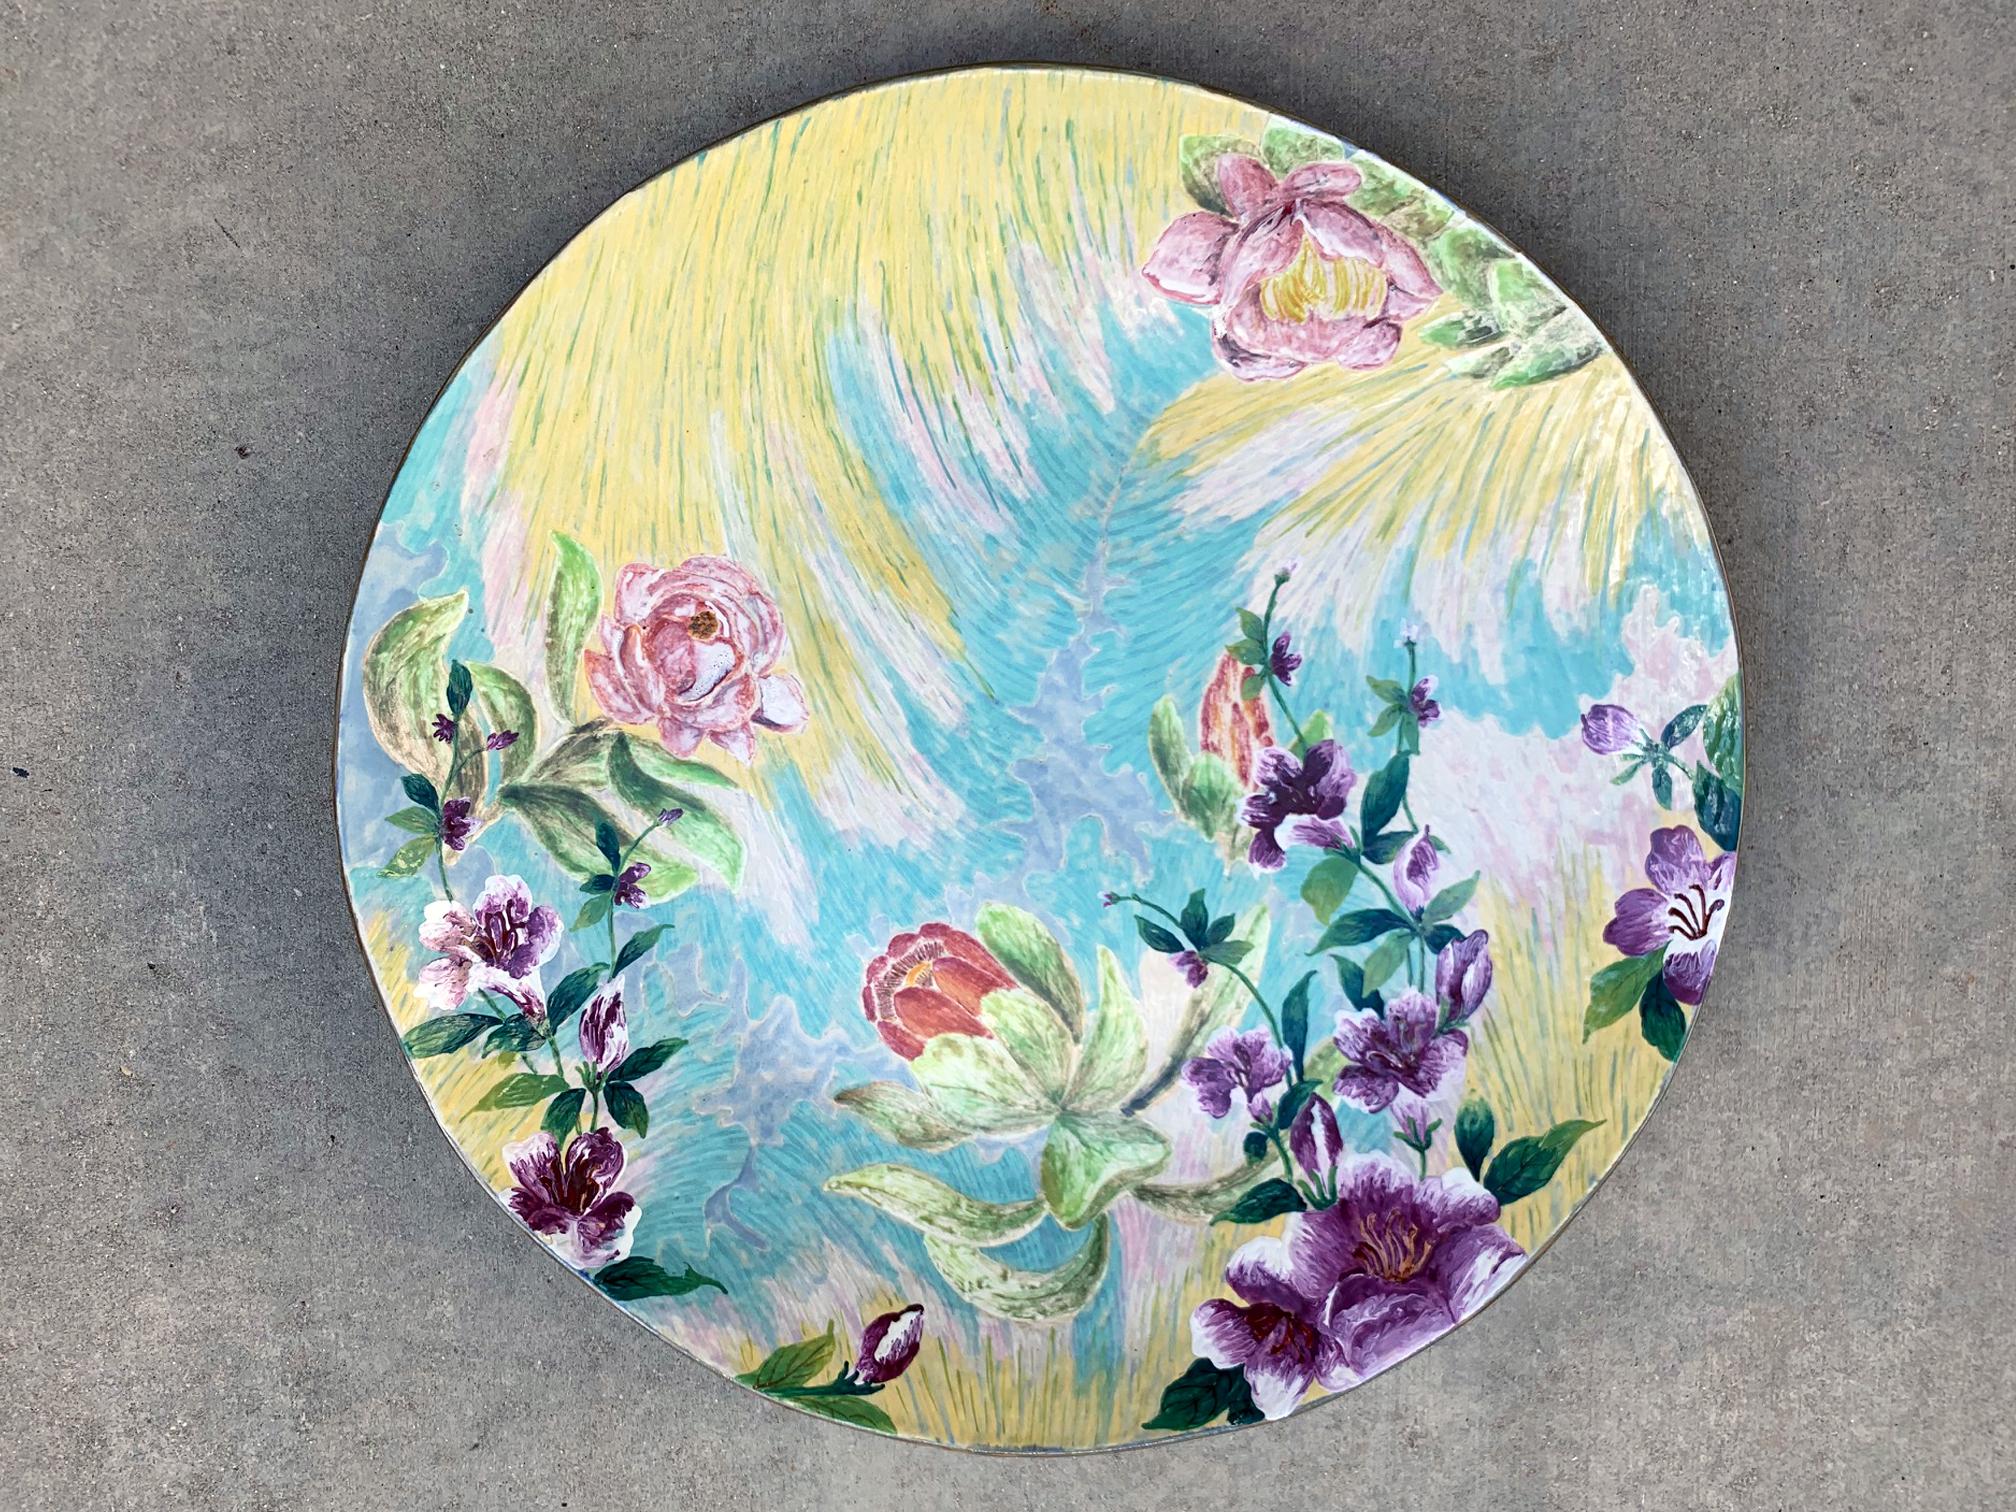 Ceramic Plate with Hand Painted Floral Designs 2